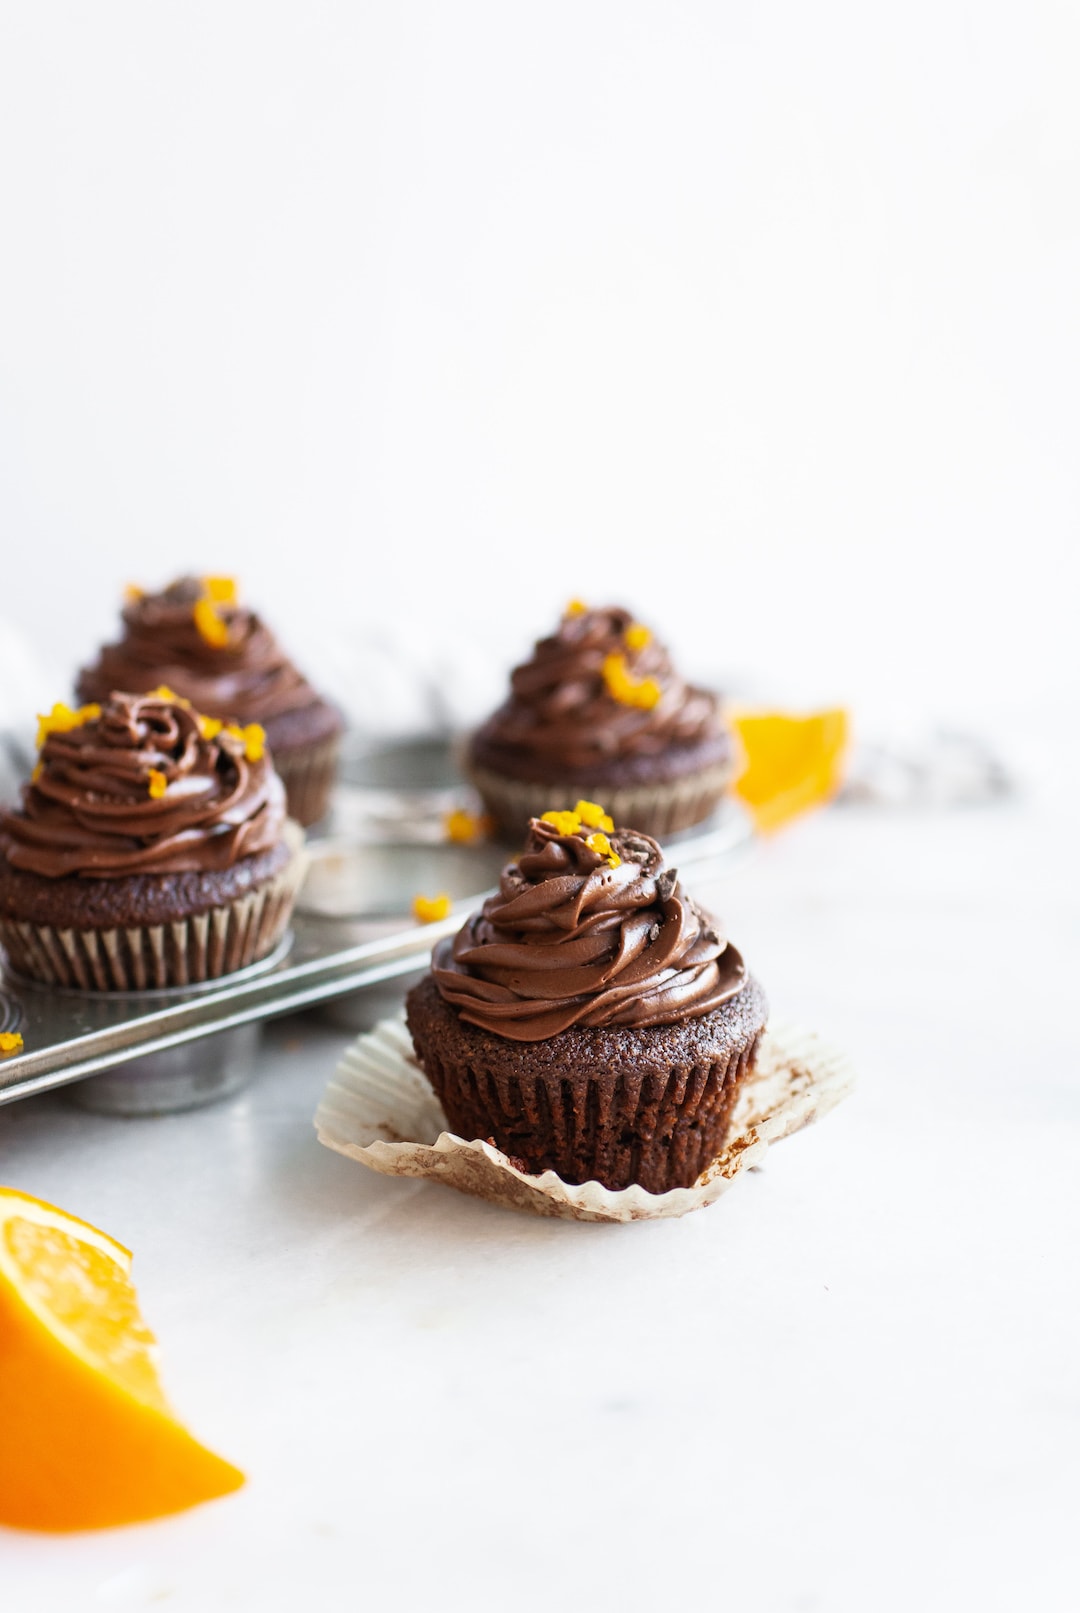 image of chocolate orange cupcakes from the side topped with orange zest and a white background